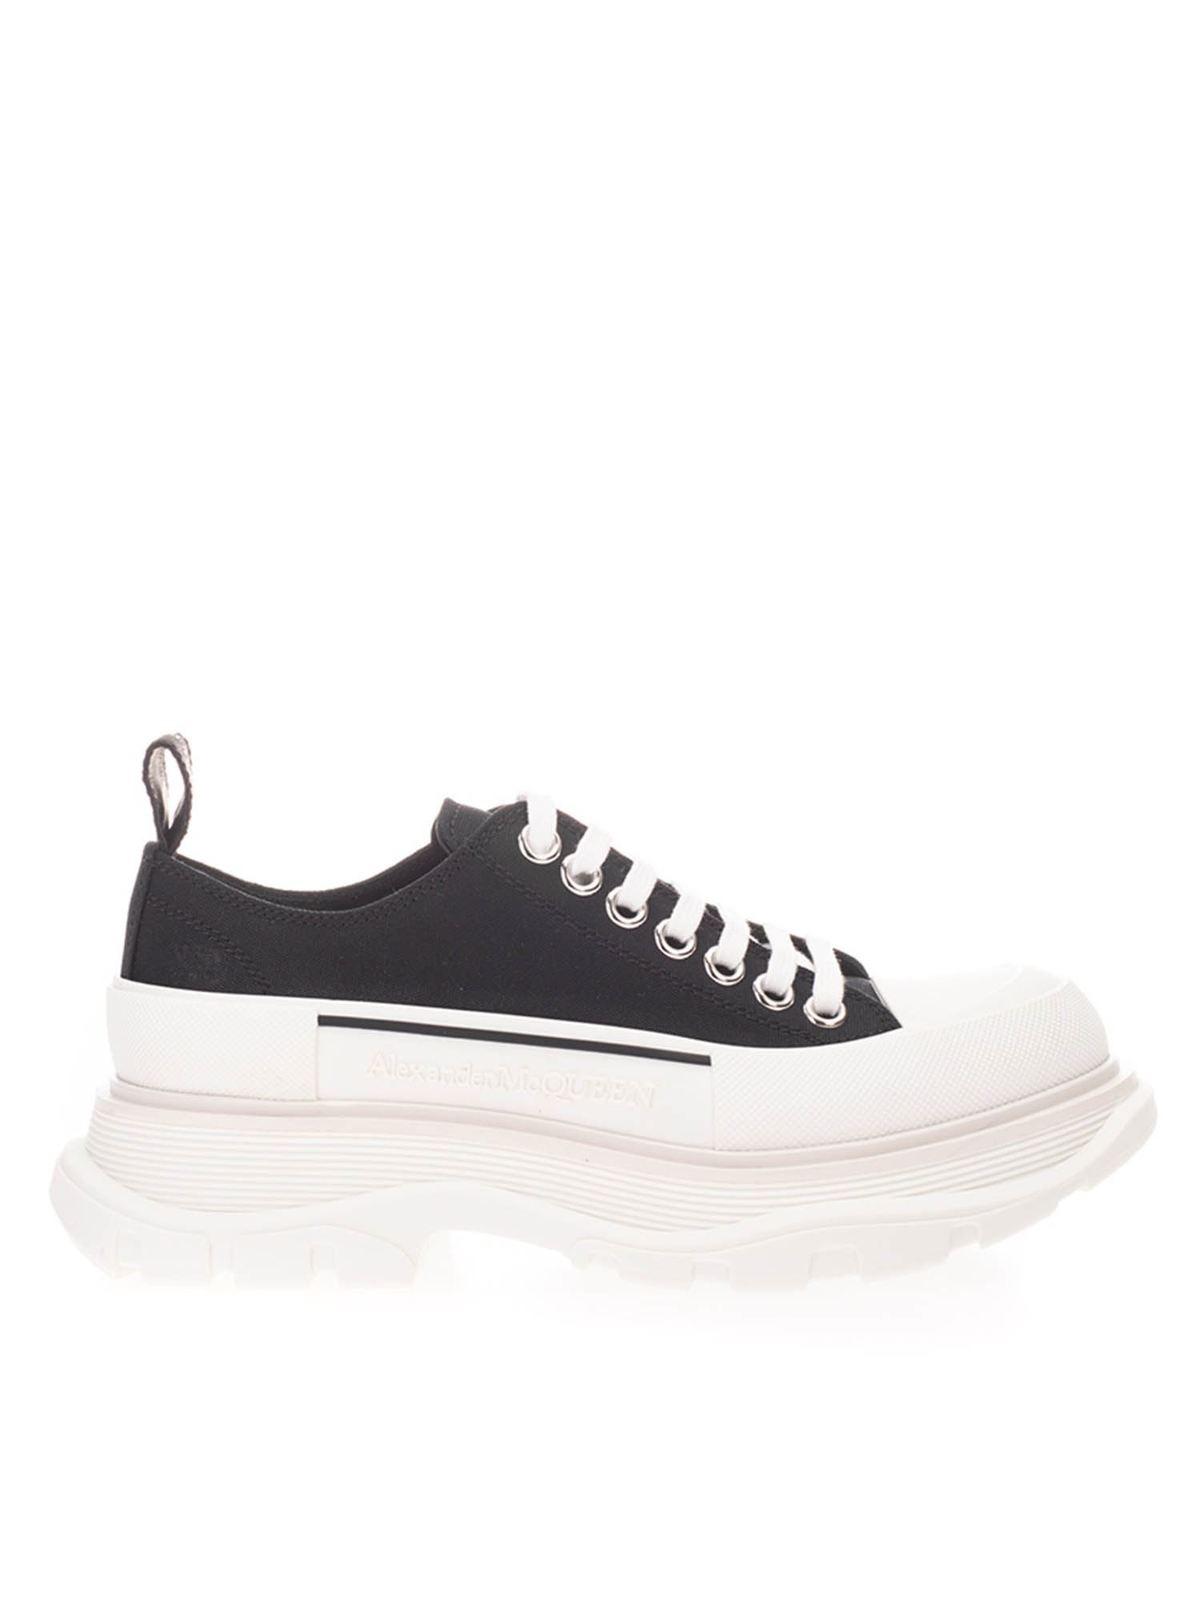 Alexander Mcqueen - Tread Slick lace-up in black and white - trainers ...